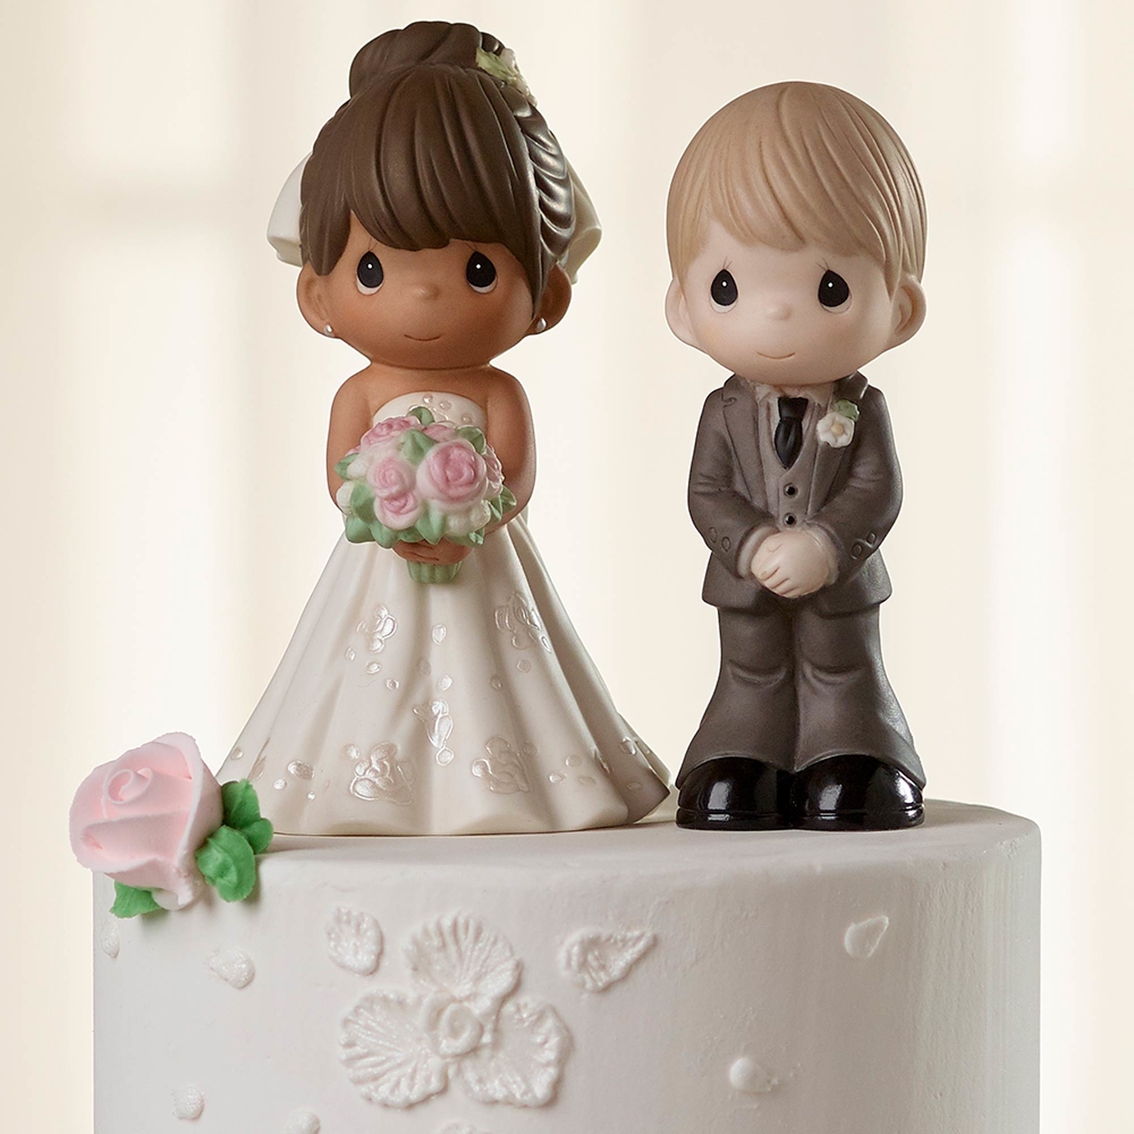 Precious Moments Mix and Match Bride Wedding Cake Topper, Brown Hair / Light Skin - Image 4 of 4